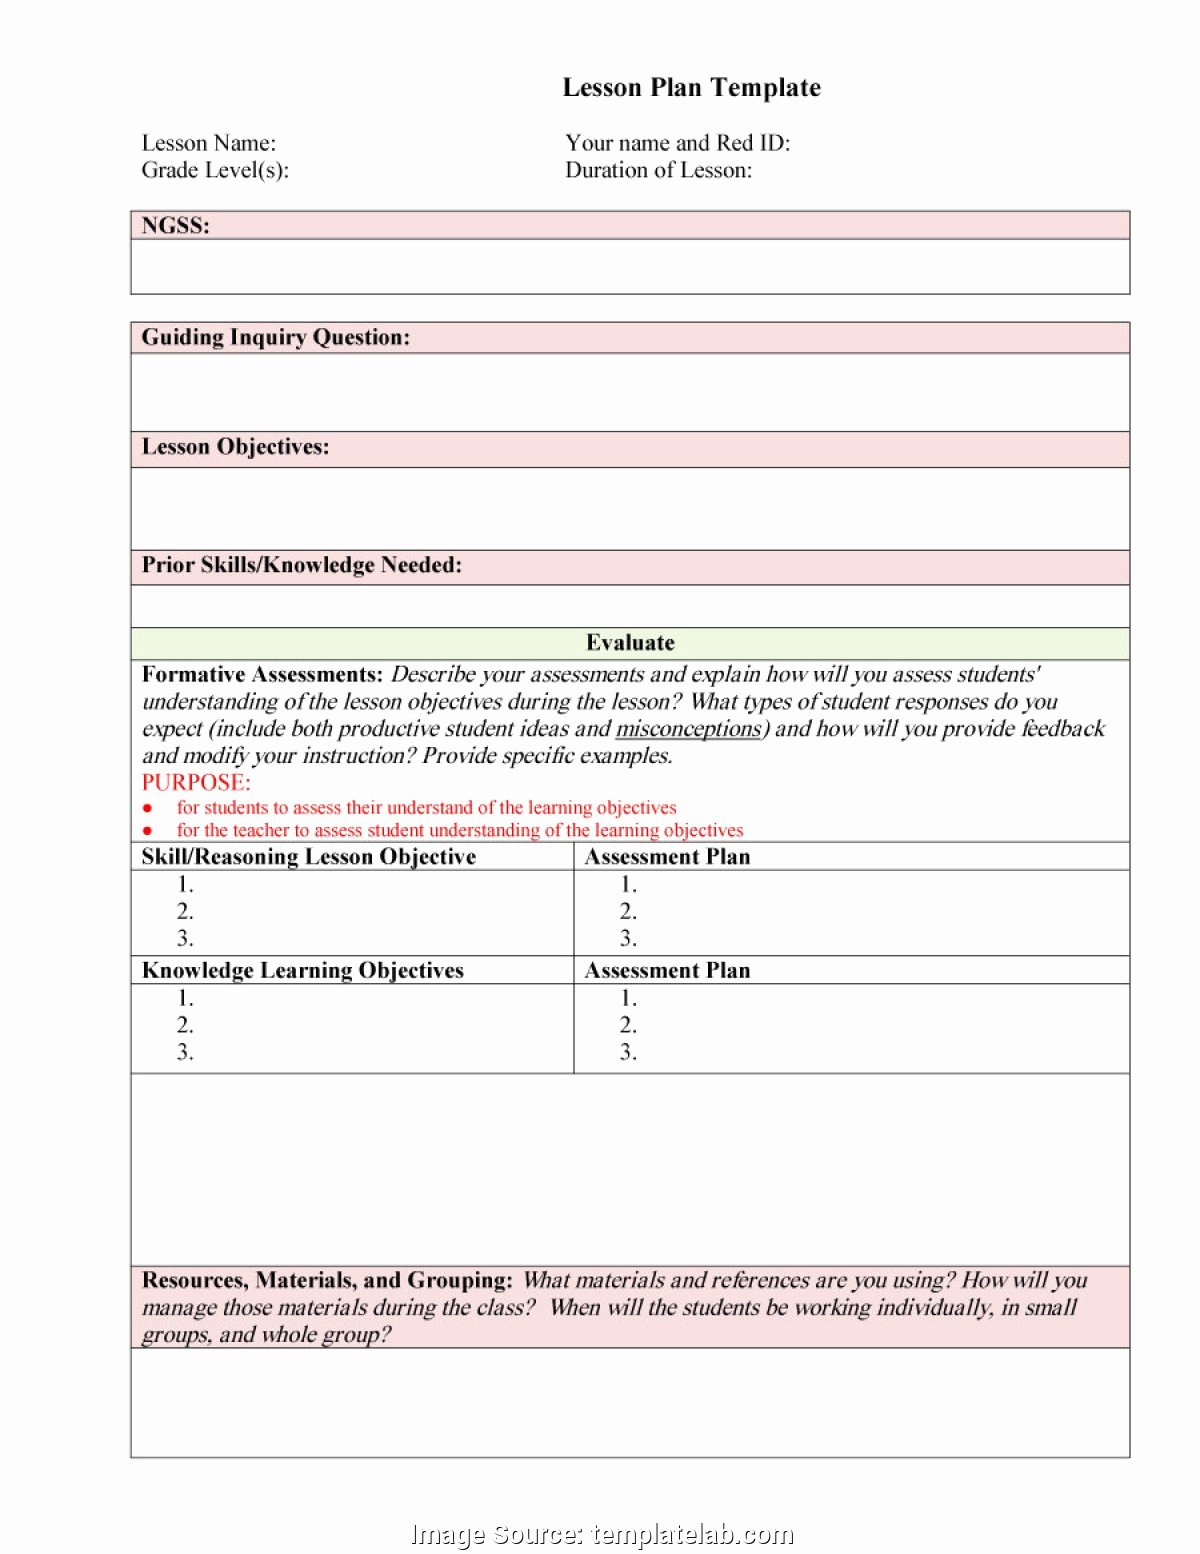 Ngss Lesson Plan Template Fresh Simple toddler Classroom themes Best 25 toddler Classroom